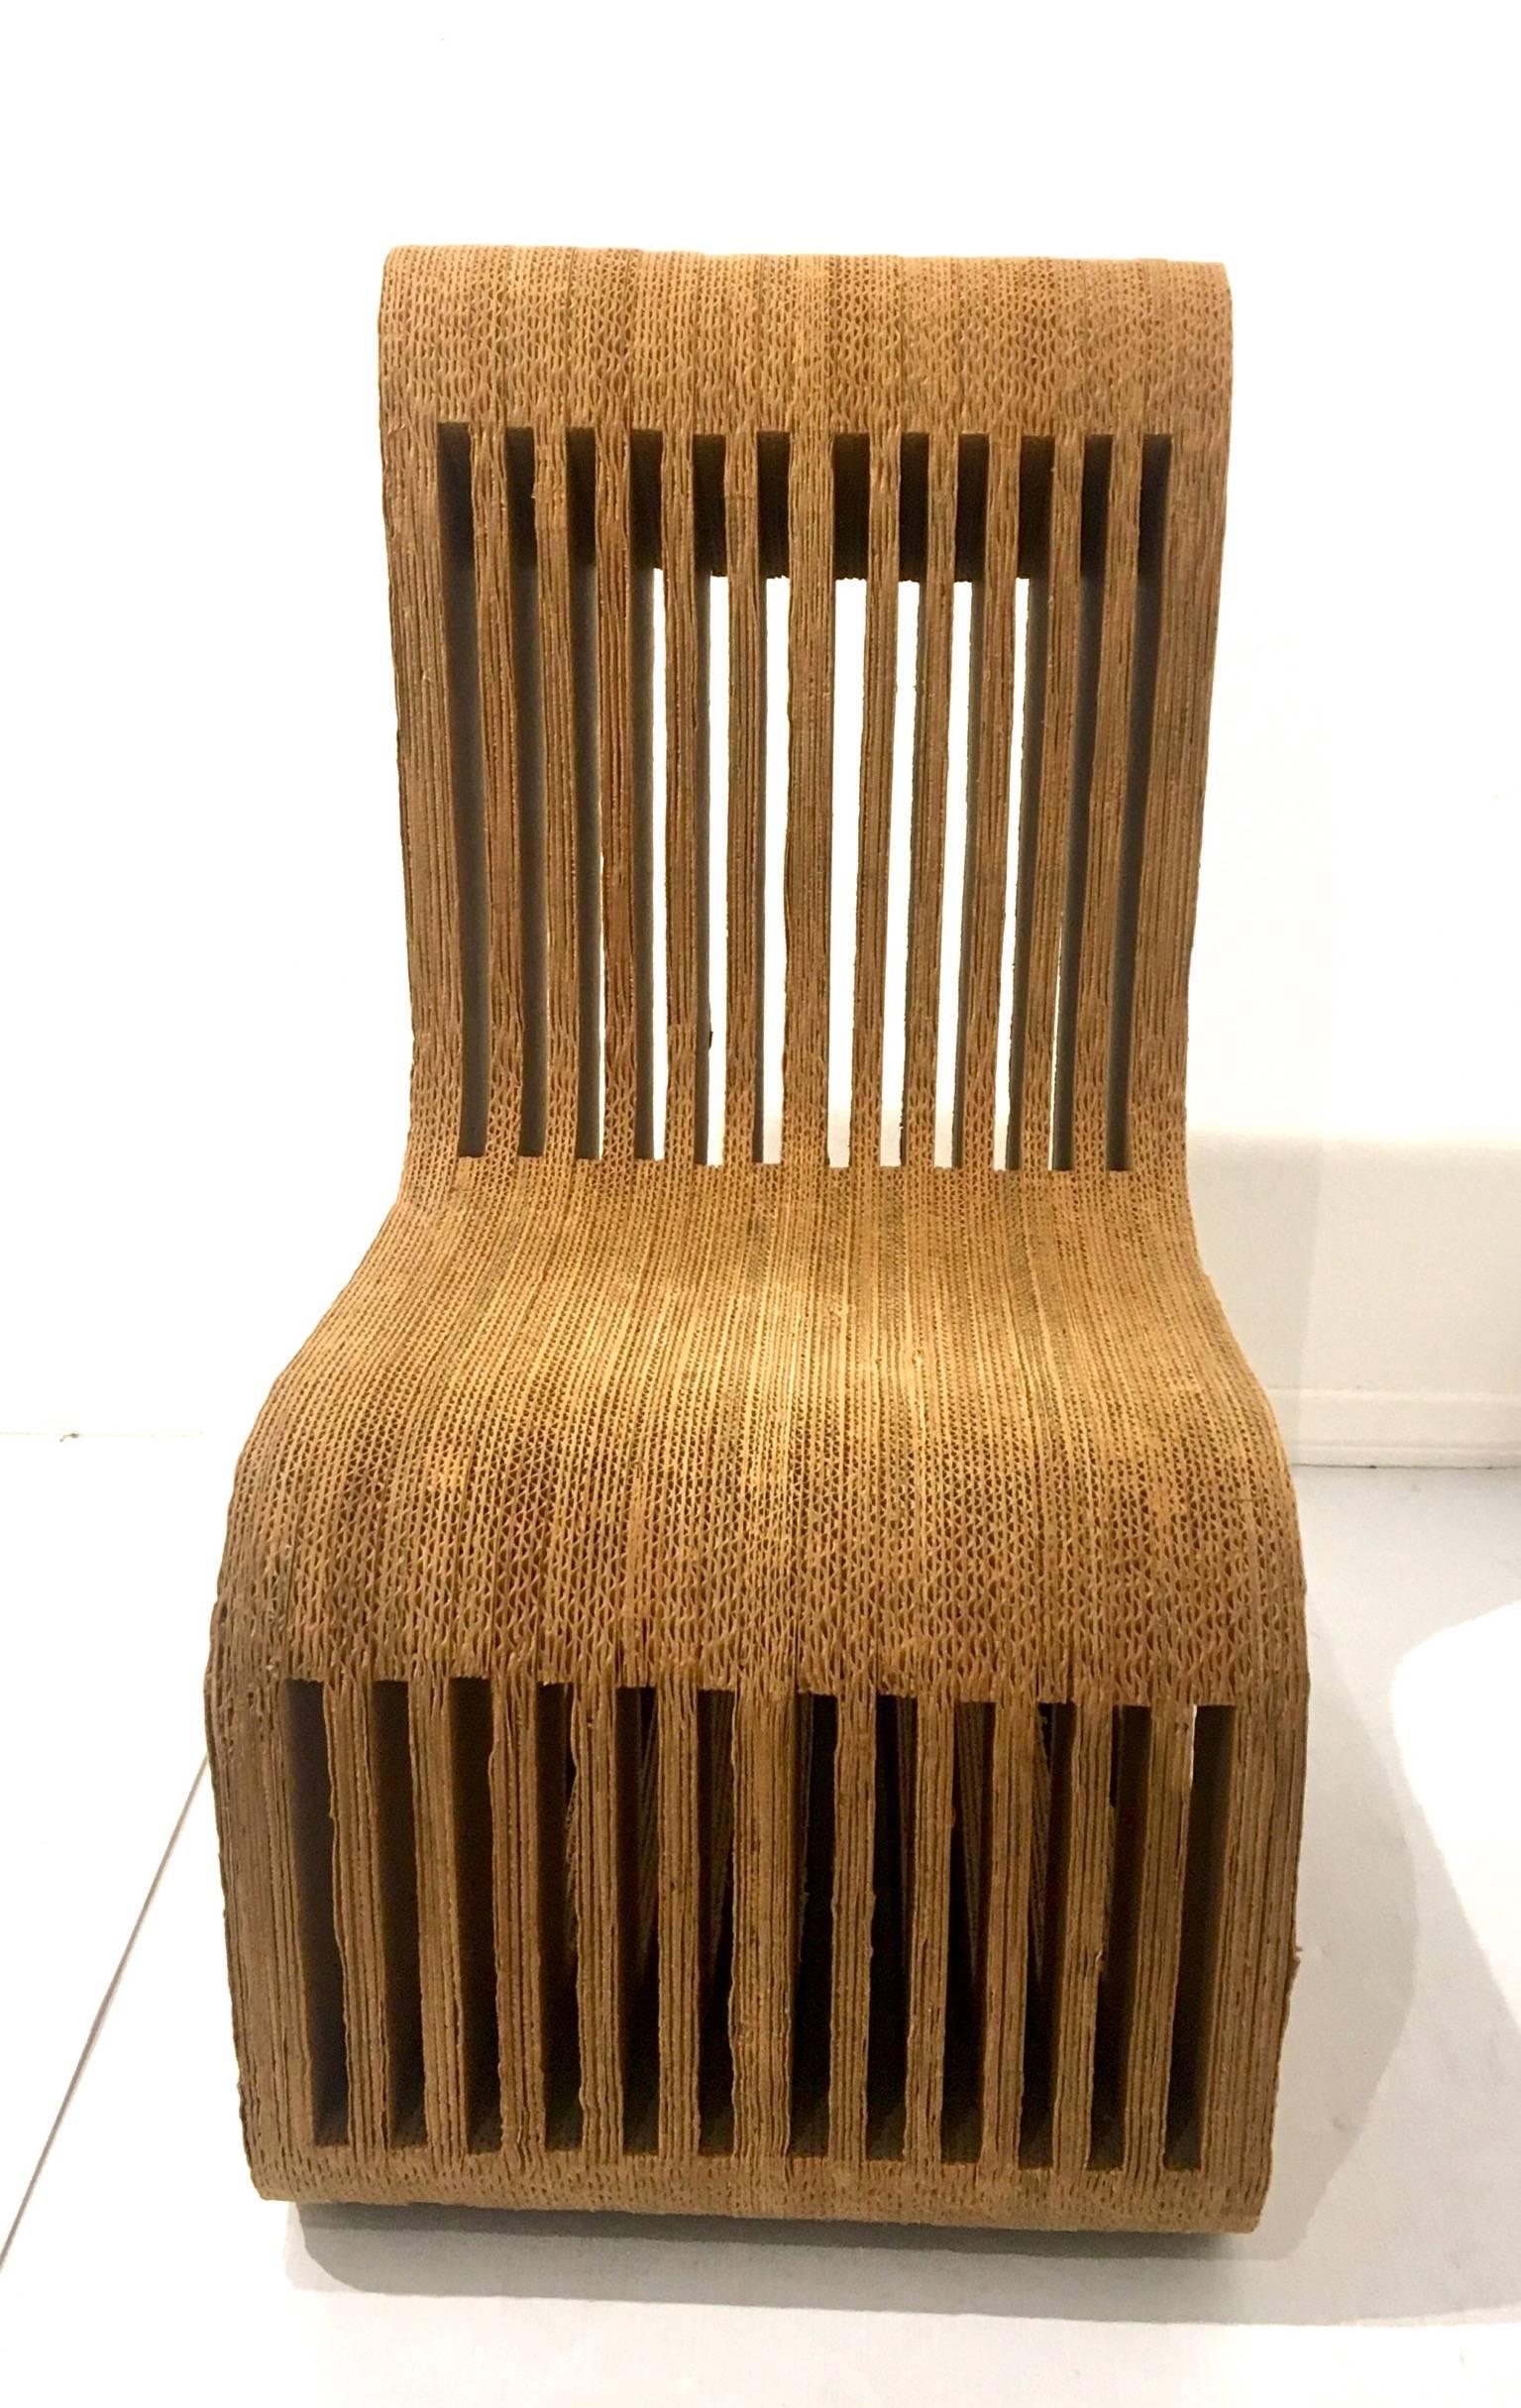 A very rare chair, in cardboard, circa 1980s according to the owner she purchased this chair in the early 1980s, and was sold to her as a prototype chair by arq. Frank Ghery, the condition its very clean with some light stains, but overall very